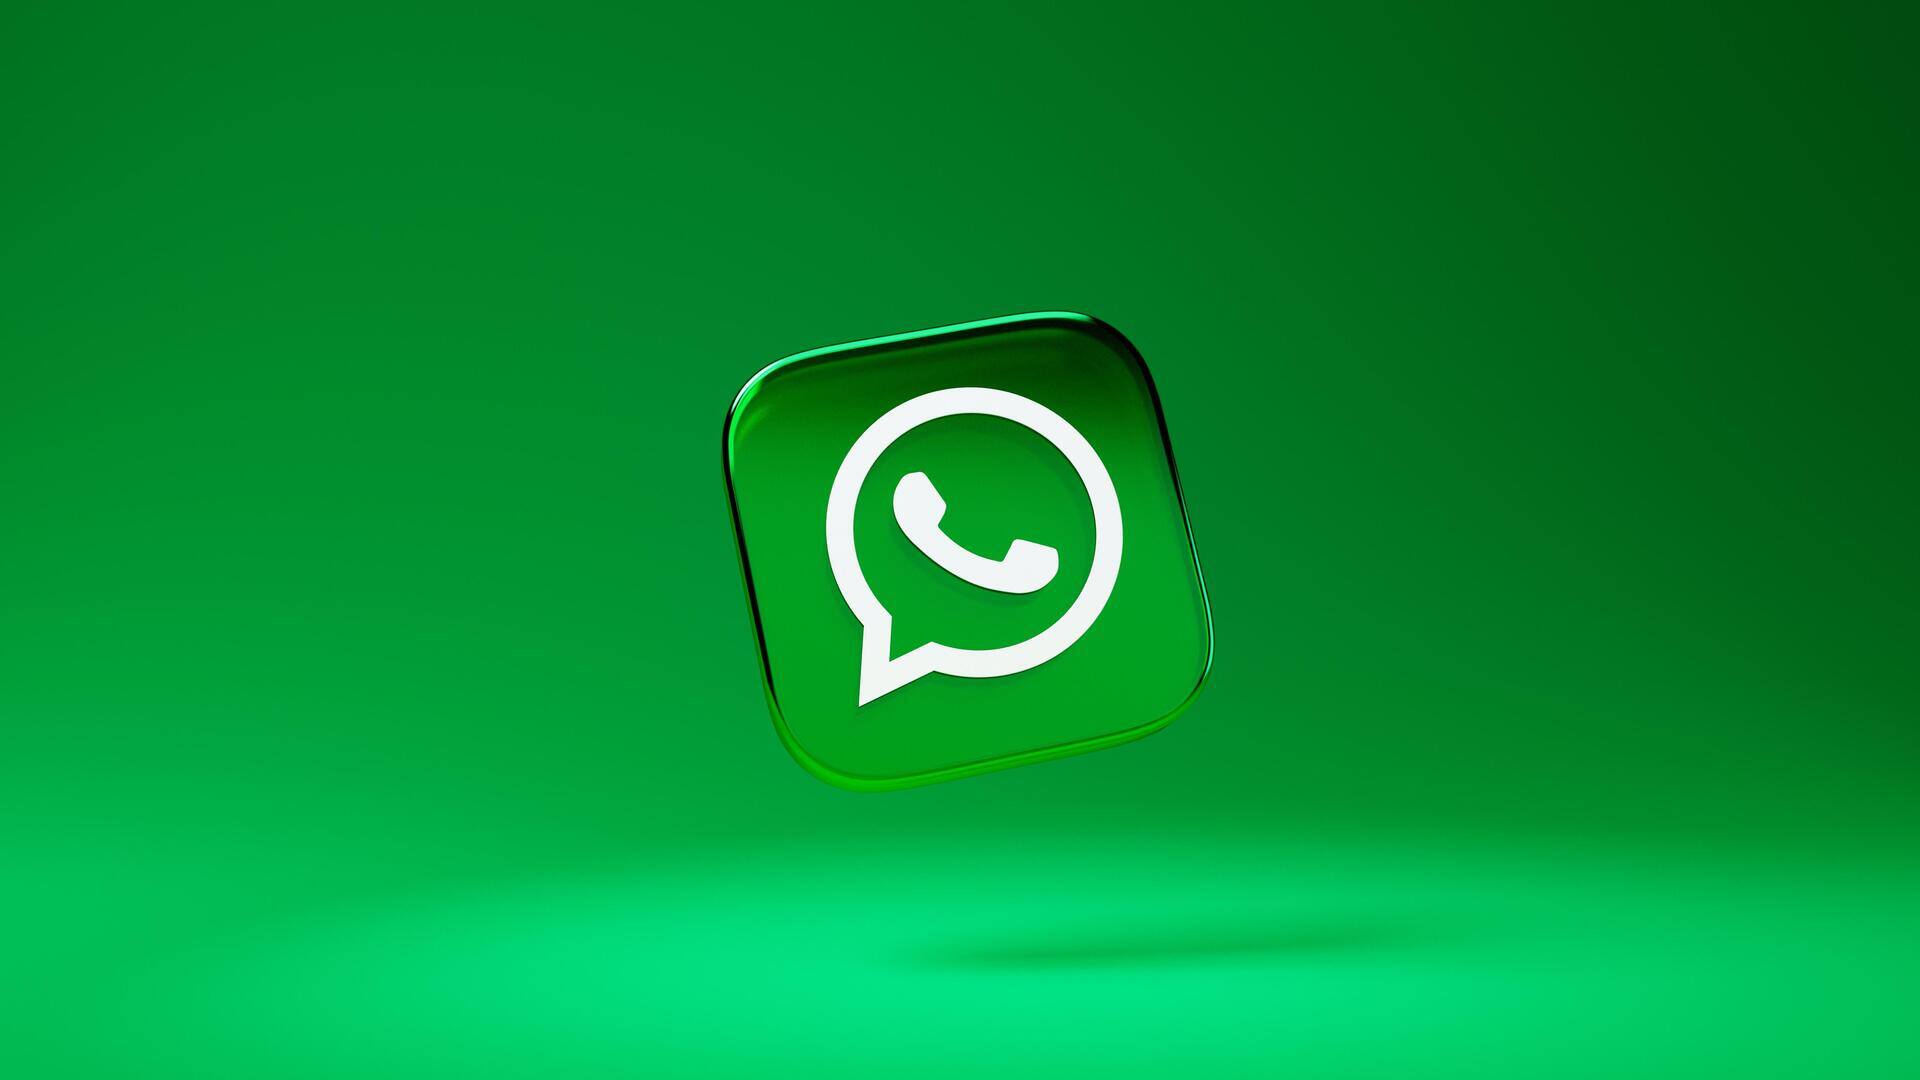 New WhatsApp feature: Link accounts to web using phone number